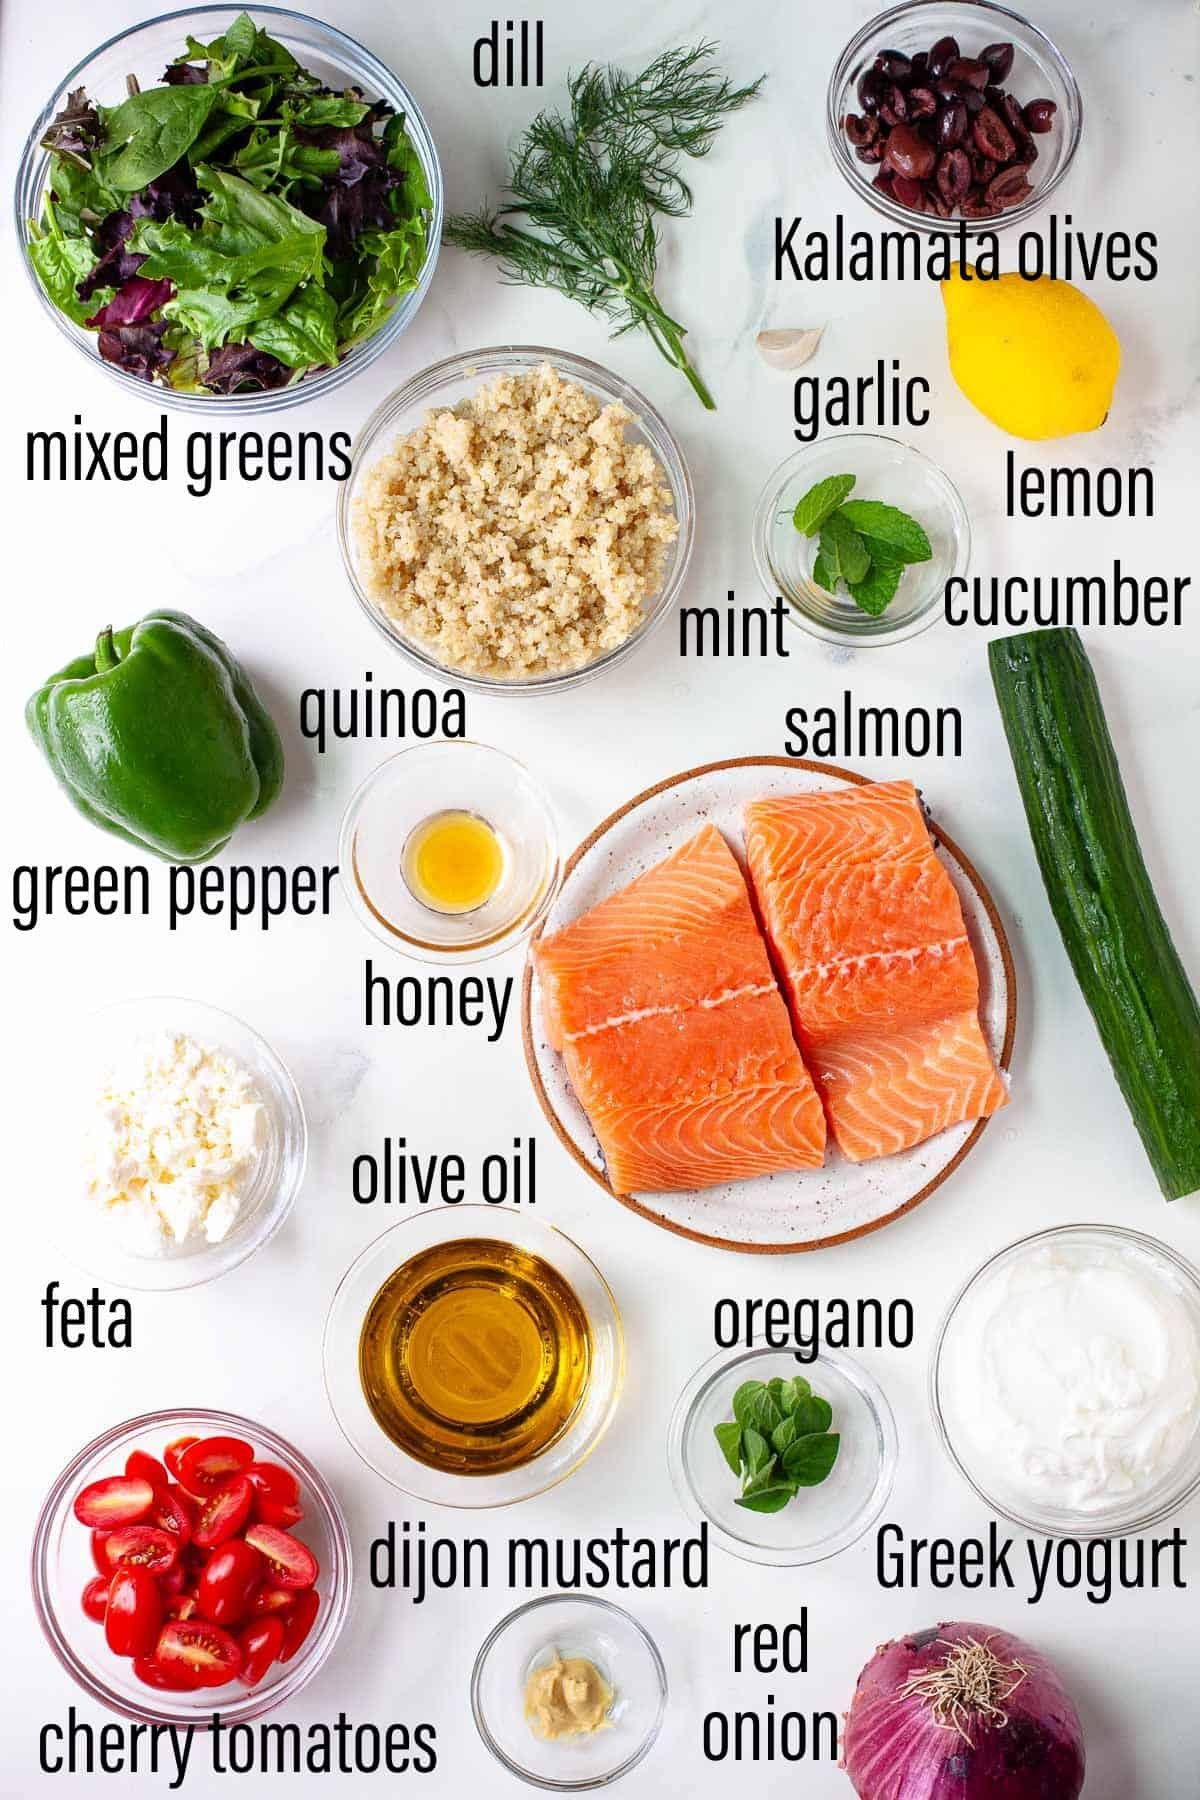 graphic of ingredients for greek salmon quinoa bowl on marble surface with black text overlay.